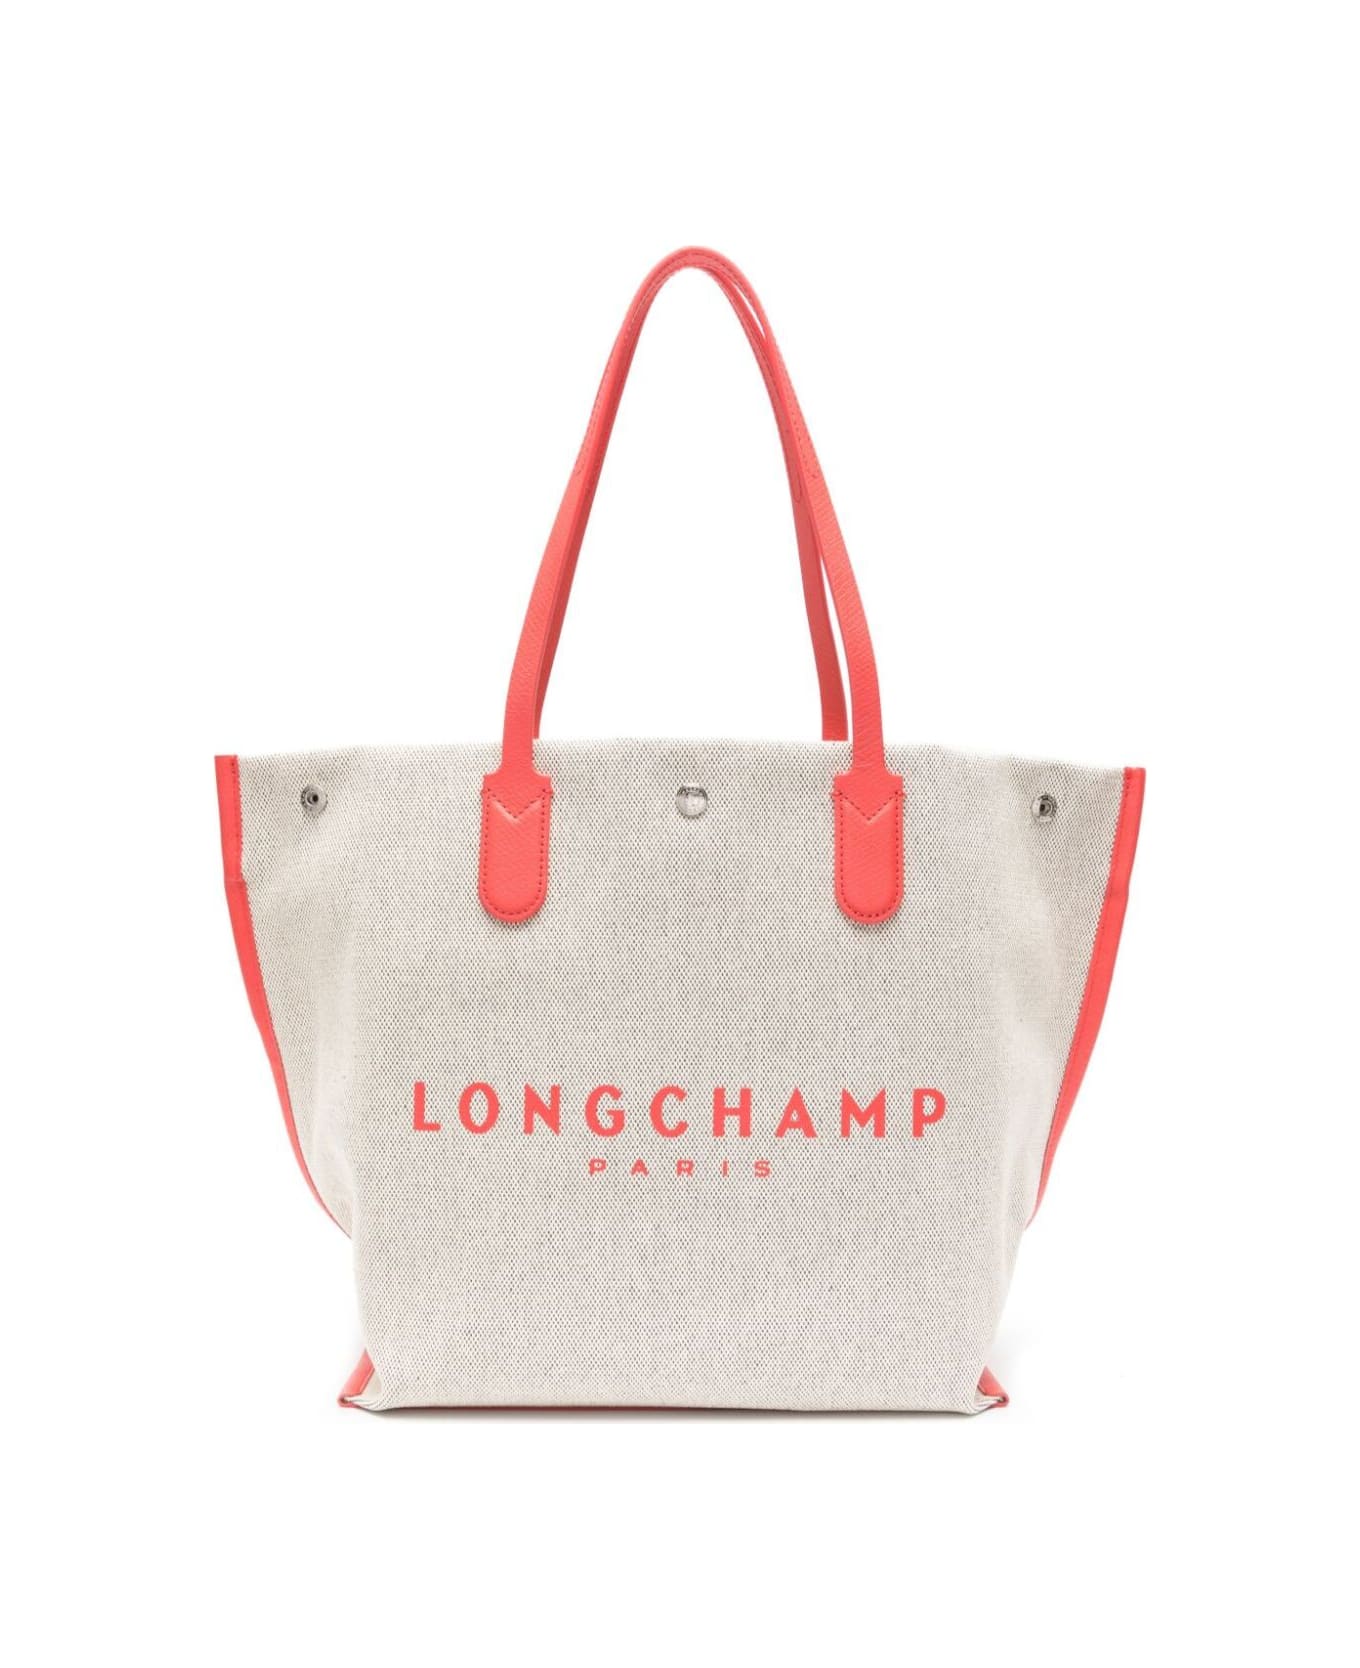 Longchamp 'roseau' Beige Tote Bag With Logo Print In Cotton Canvas Woman - Beige